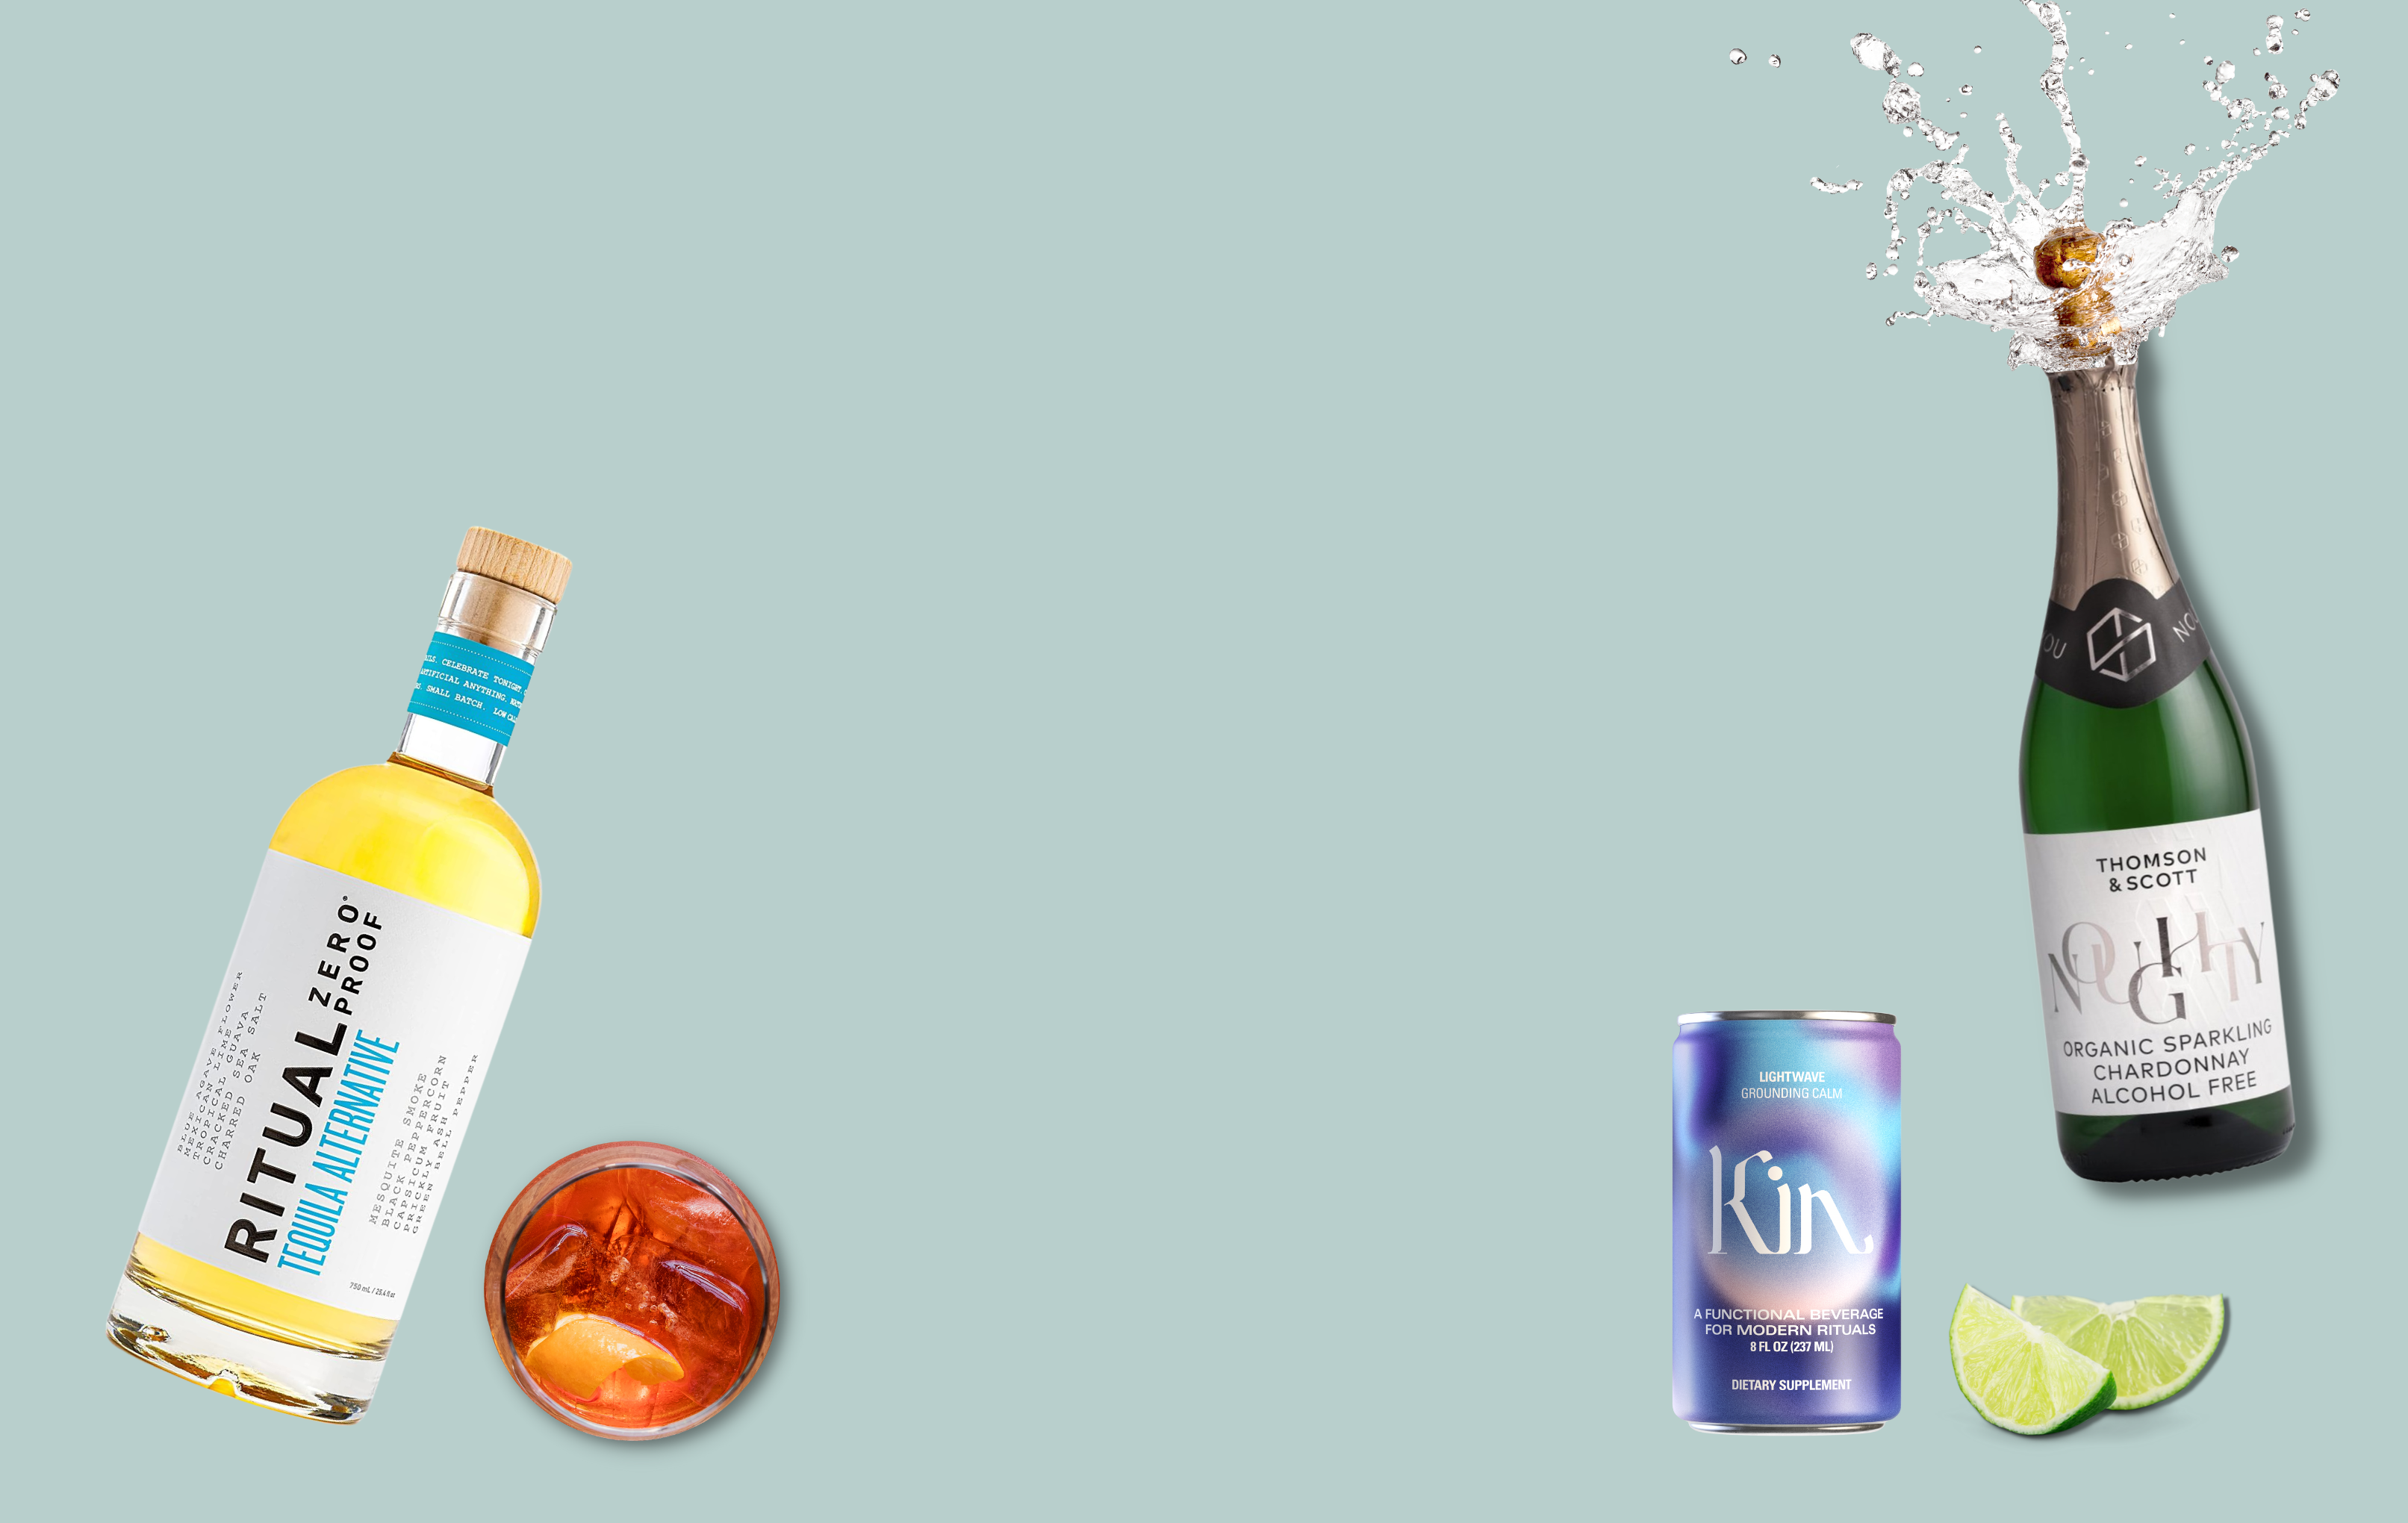  bottles and cans of non-alcoholic drinks and mocktails to buy in NY